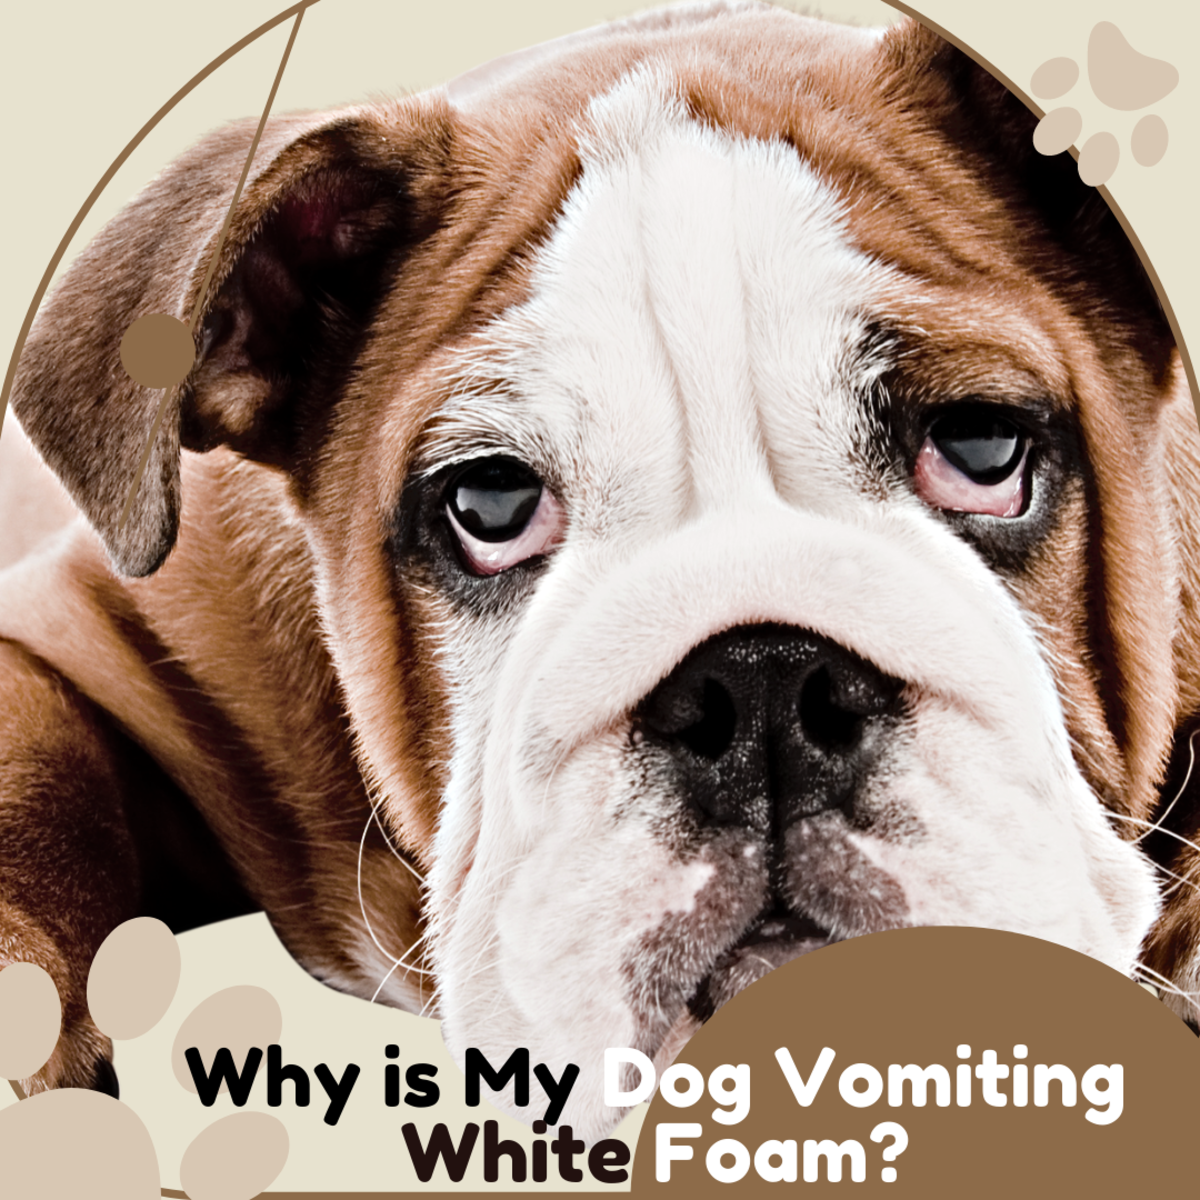 13 Causes of Dogs Vomiting White Foam